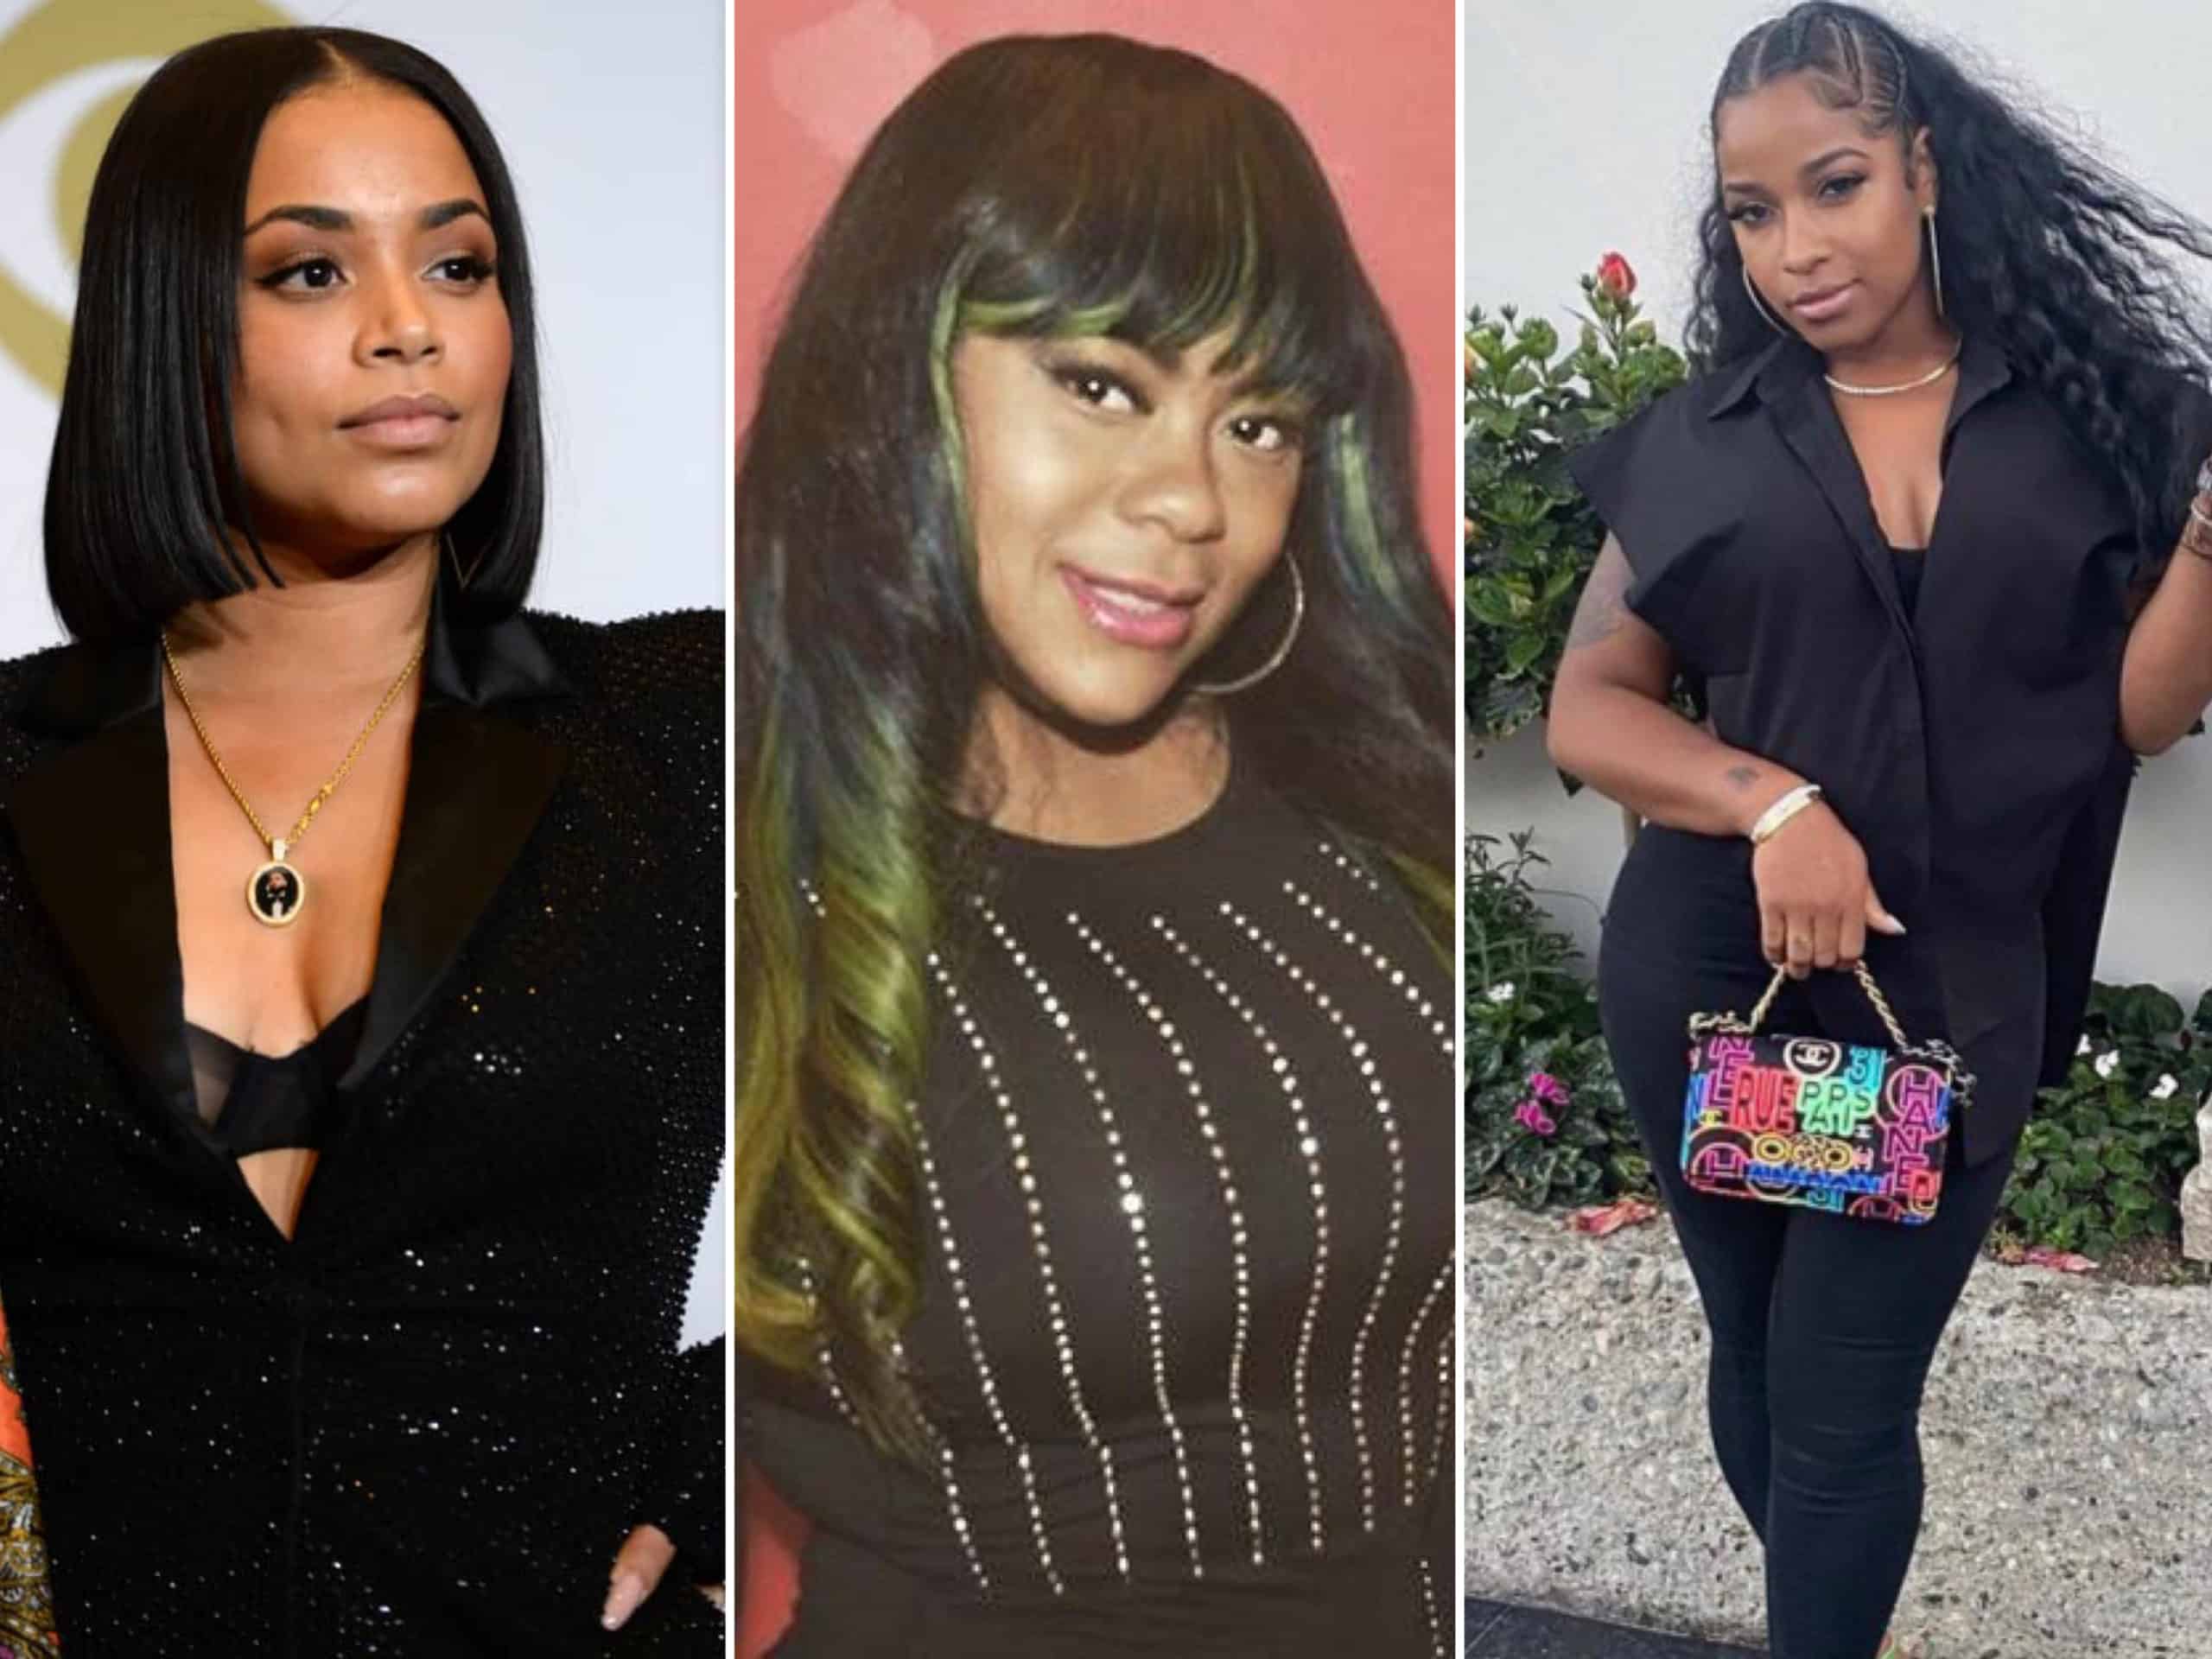 Lauren London & Toya Johnson Show Their Love & Support To Nivea After She Opens Up About Her Past In New Interview 